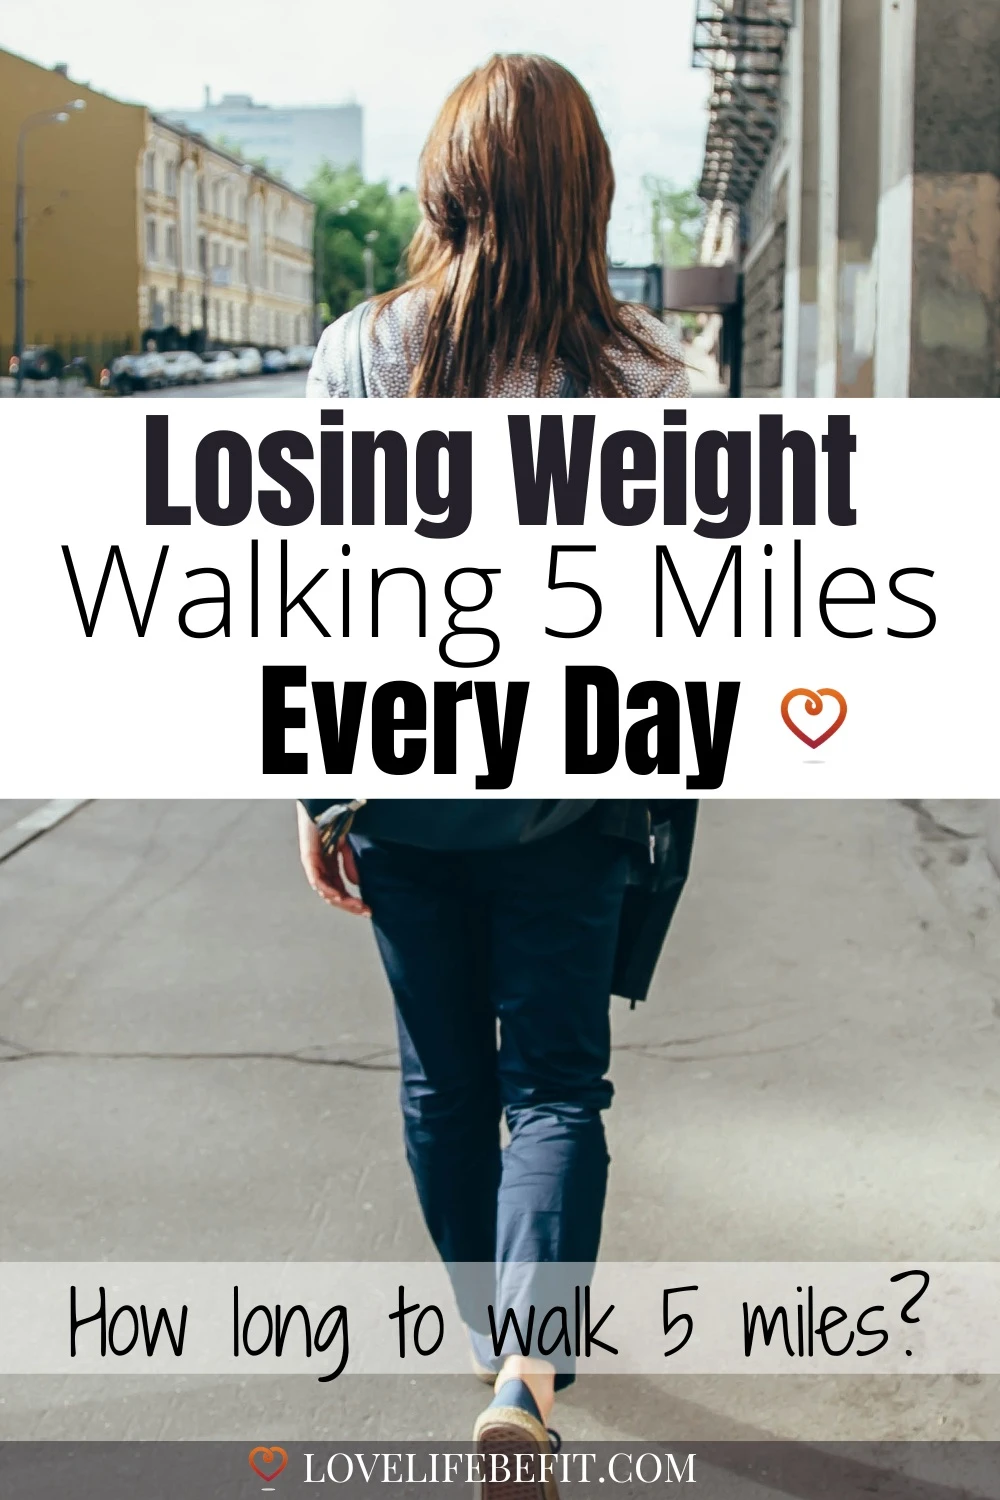 How long to walk 5 miles?